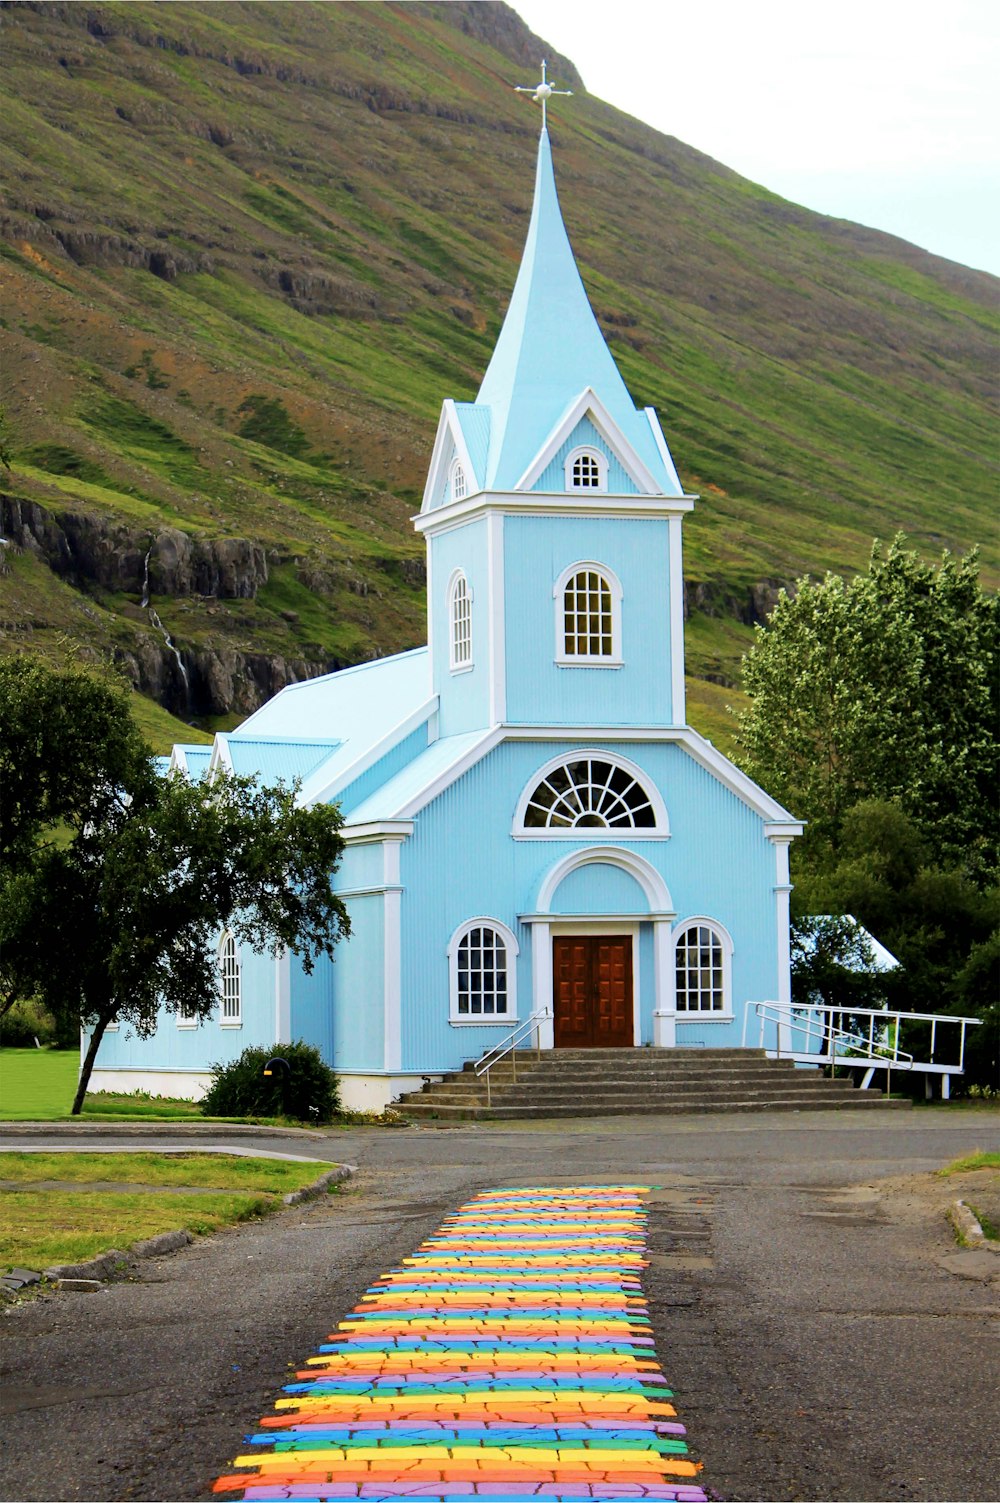 a small blue church with a steeple on a hill